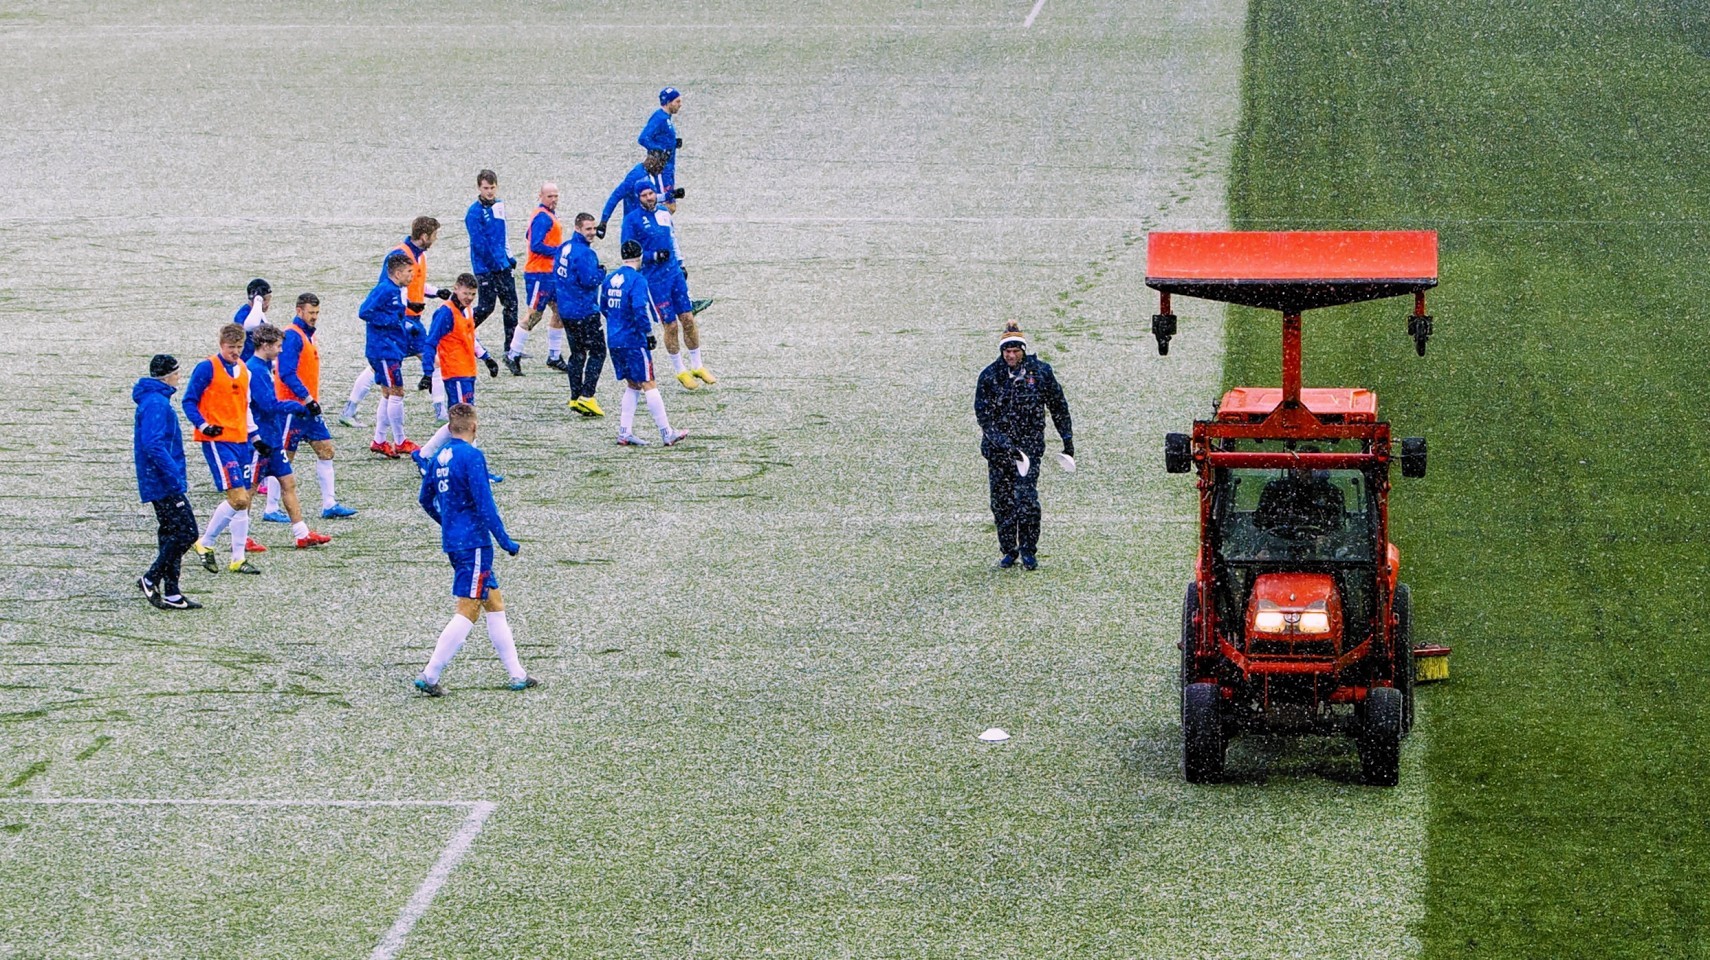 The Kilmarnock groundsmen try to clear the pitch.